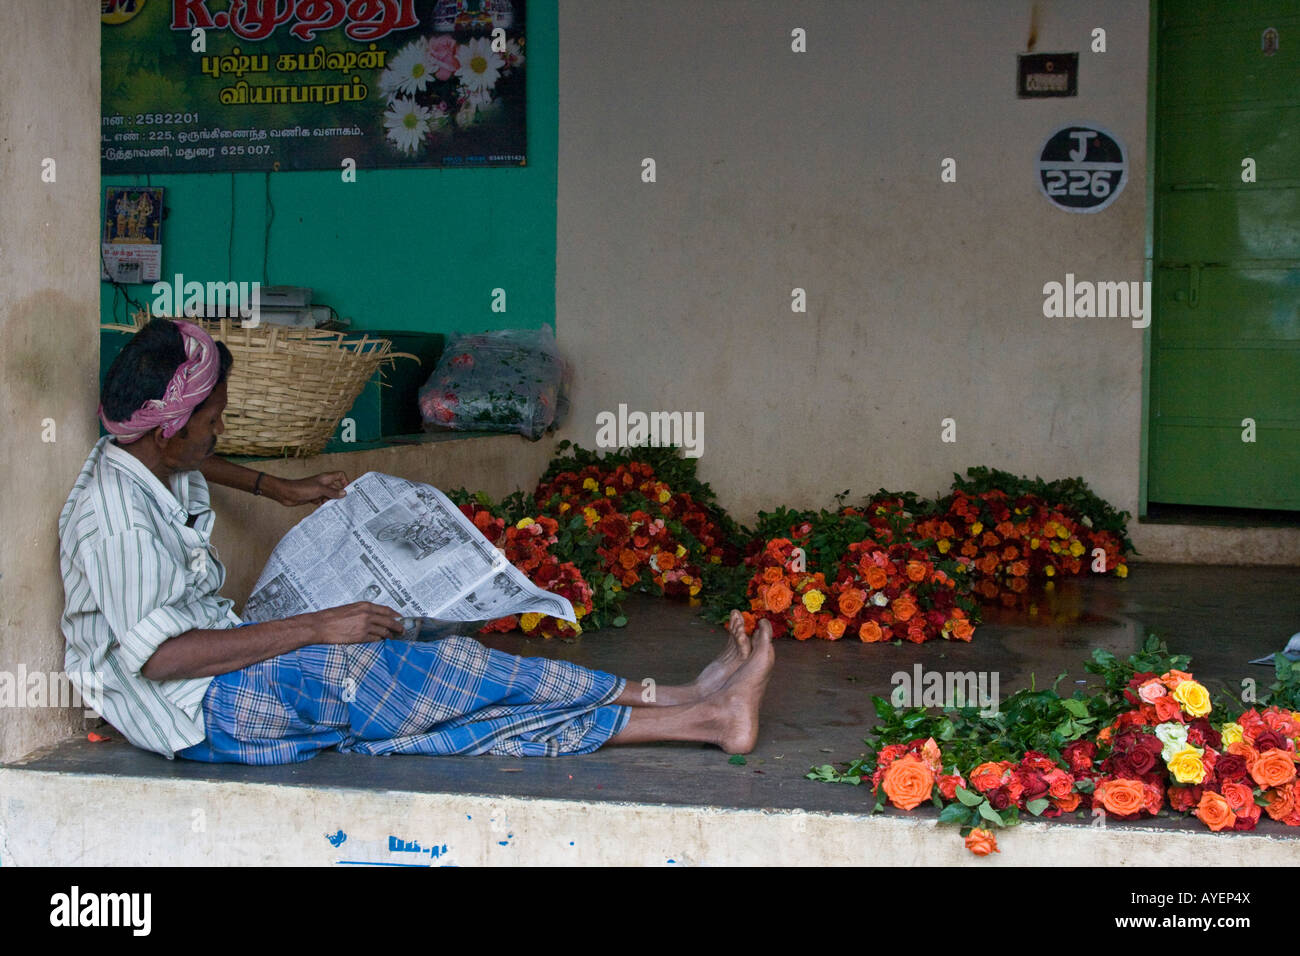 Man Reading a Newspaper in the Flower Market in Madurai South India Stock Photo